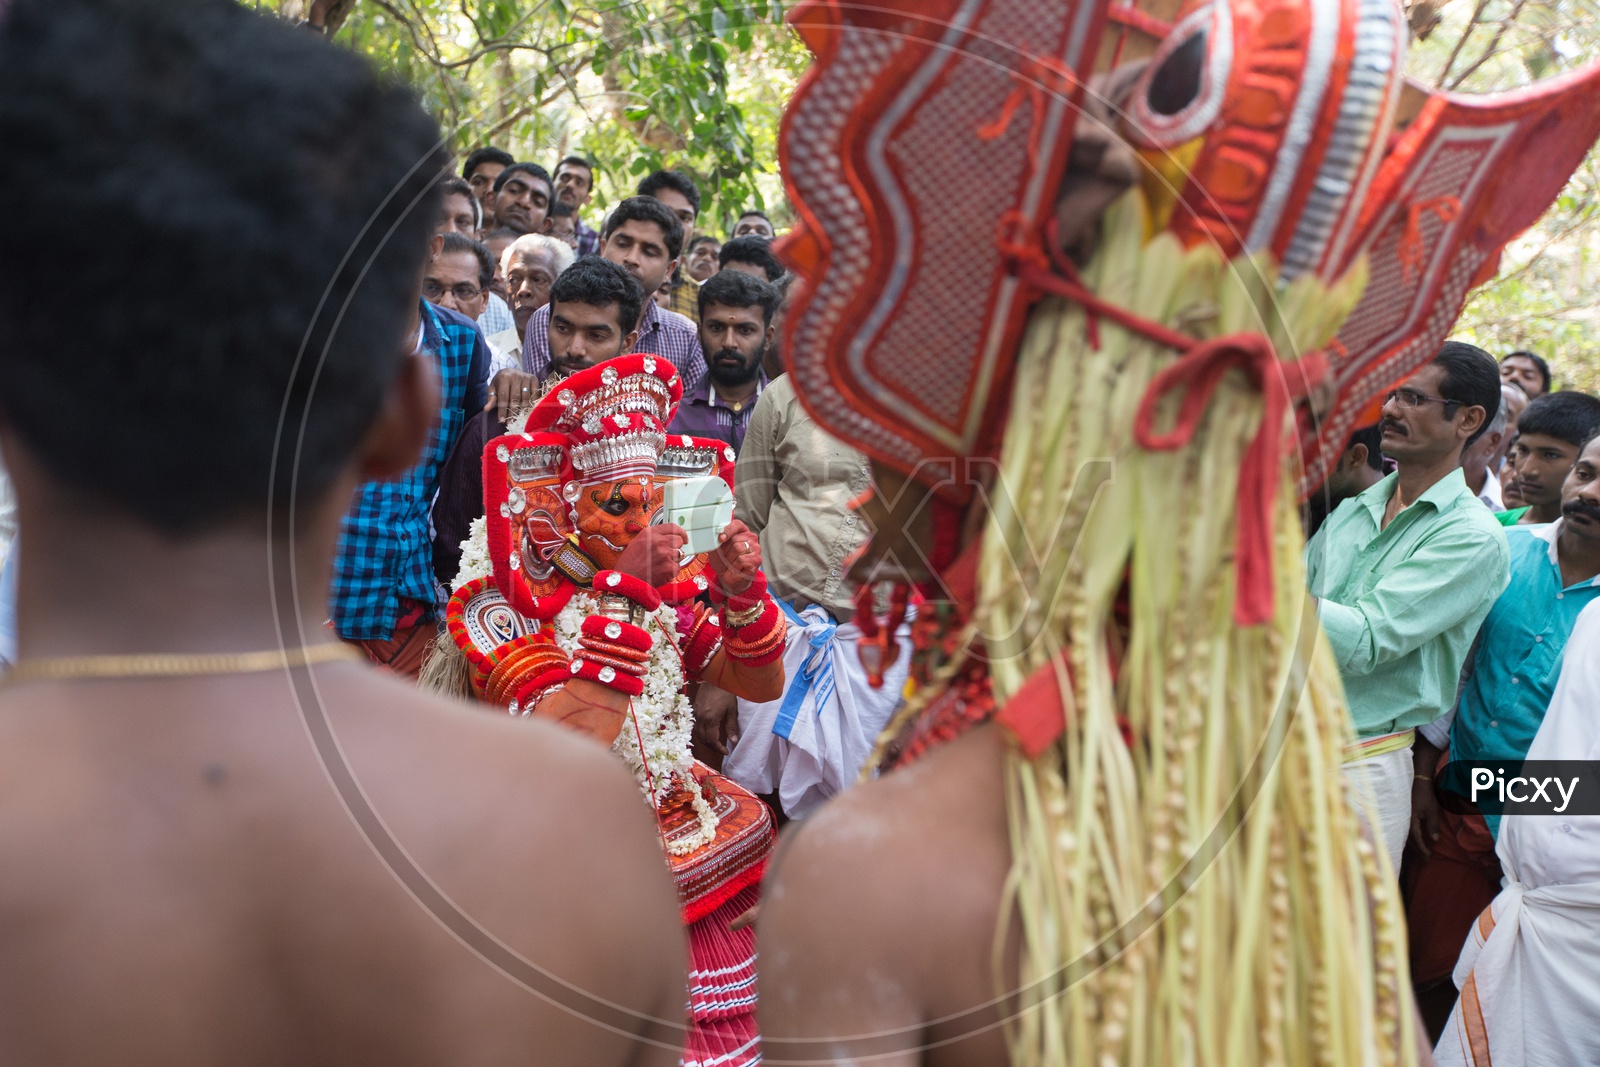 A Theyyam performer in colourful costume with a mirror